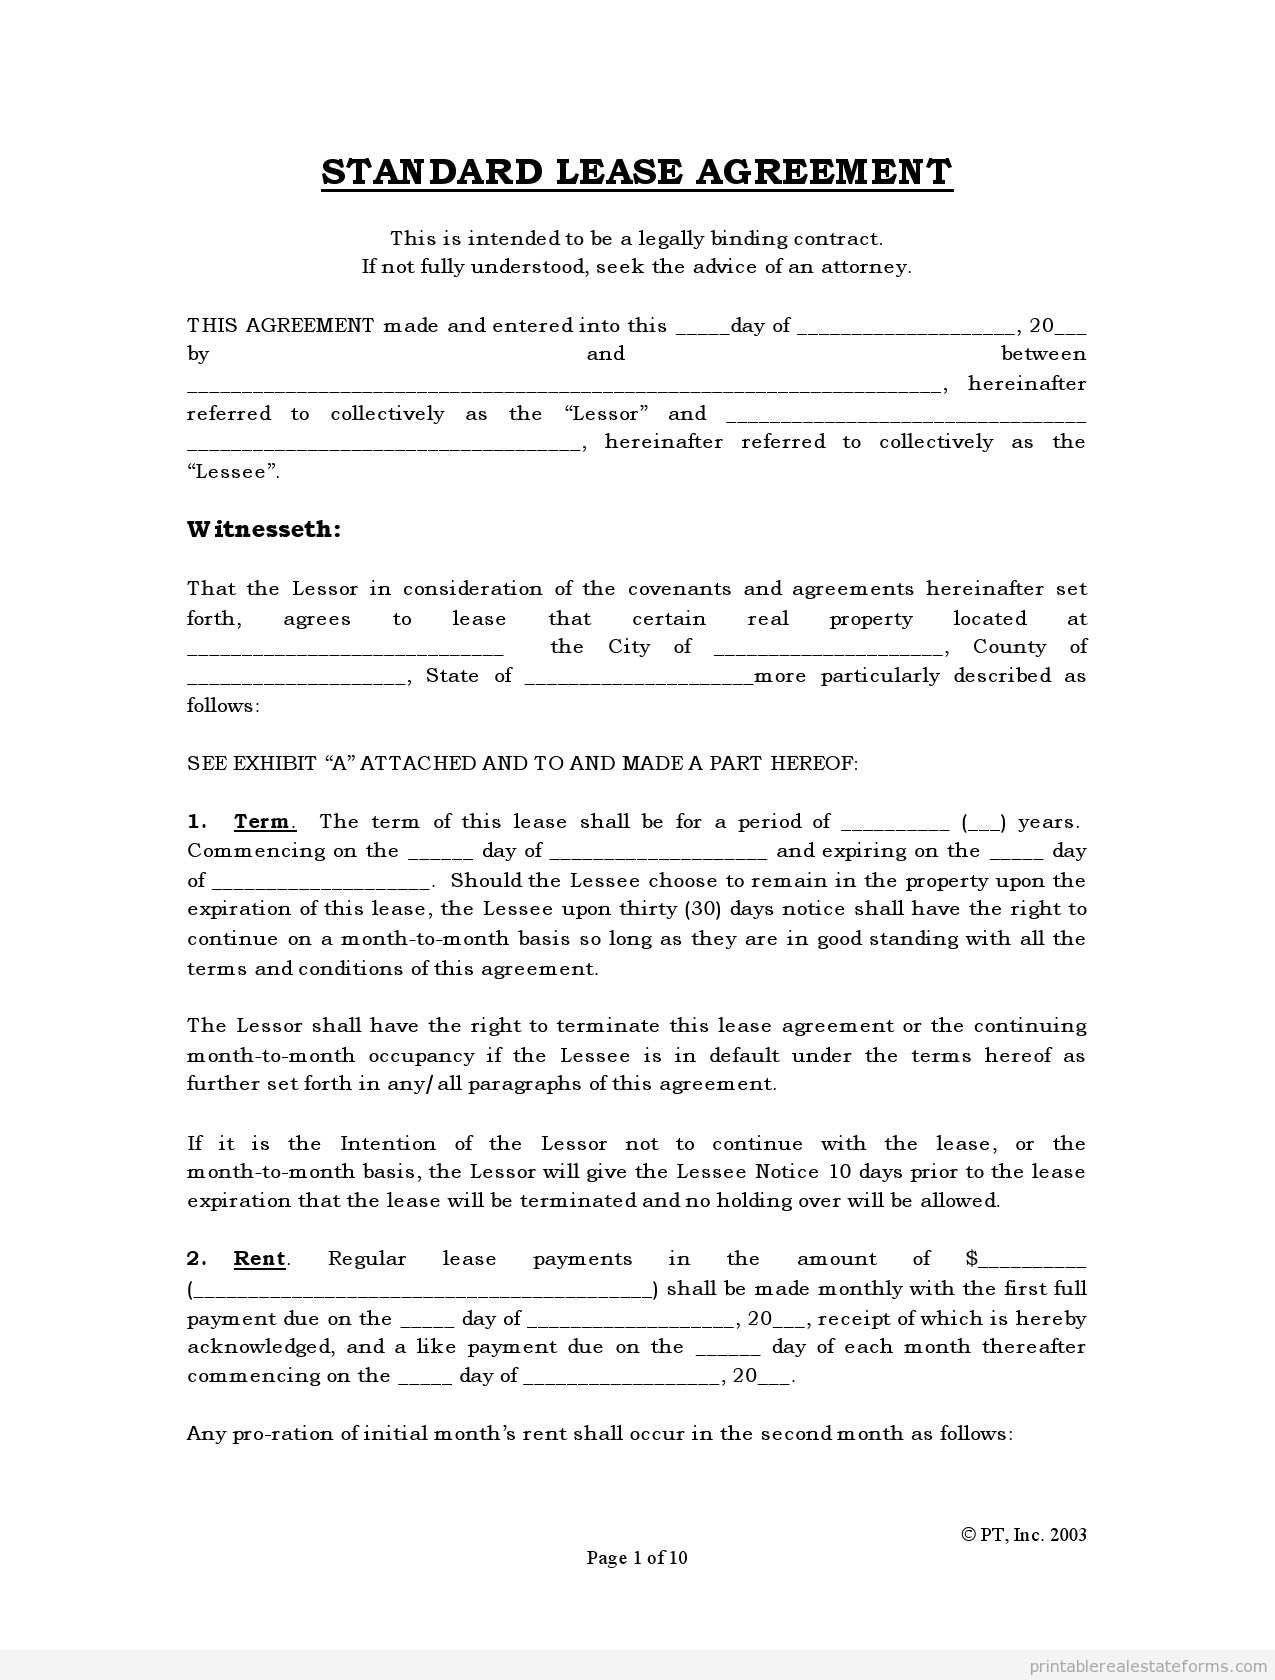 rental agreement letter template Collection-Rental Agreement Letter Example Luxury Standard Rental Agreement Luxury Jaguar2 0d I4 150ps Fwd Lease Deal 20-q